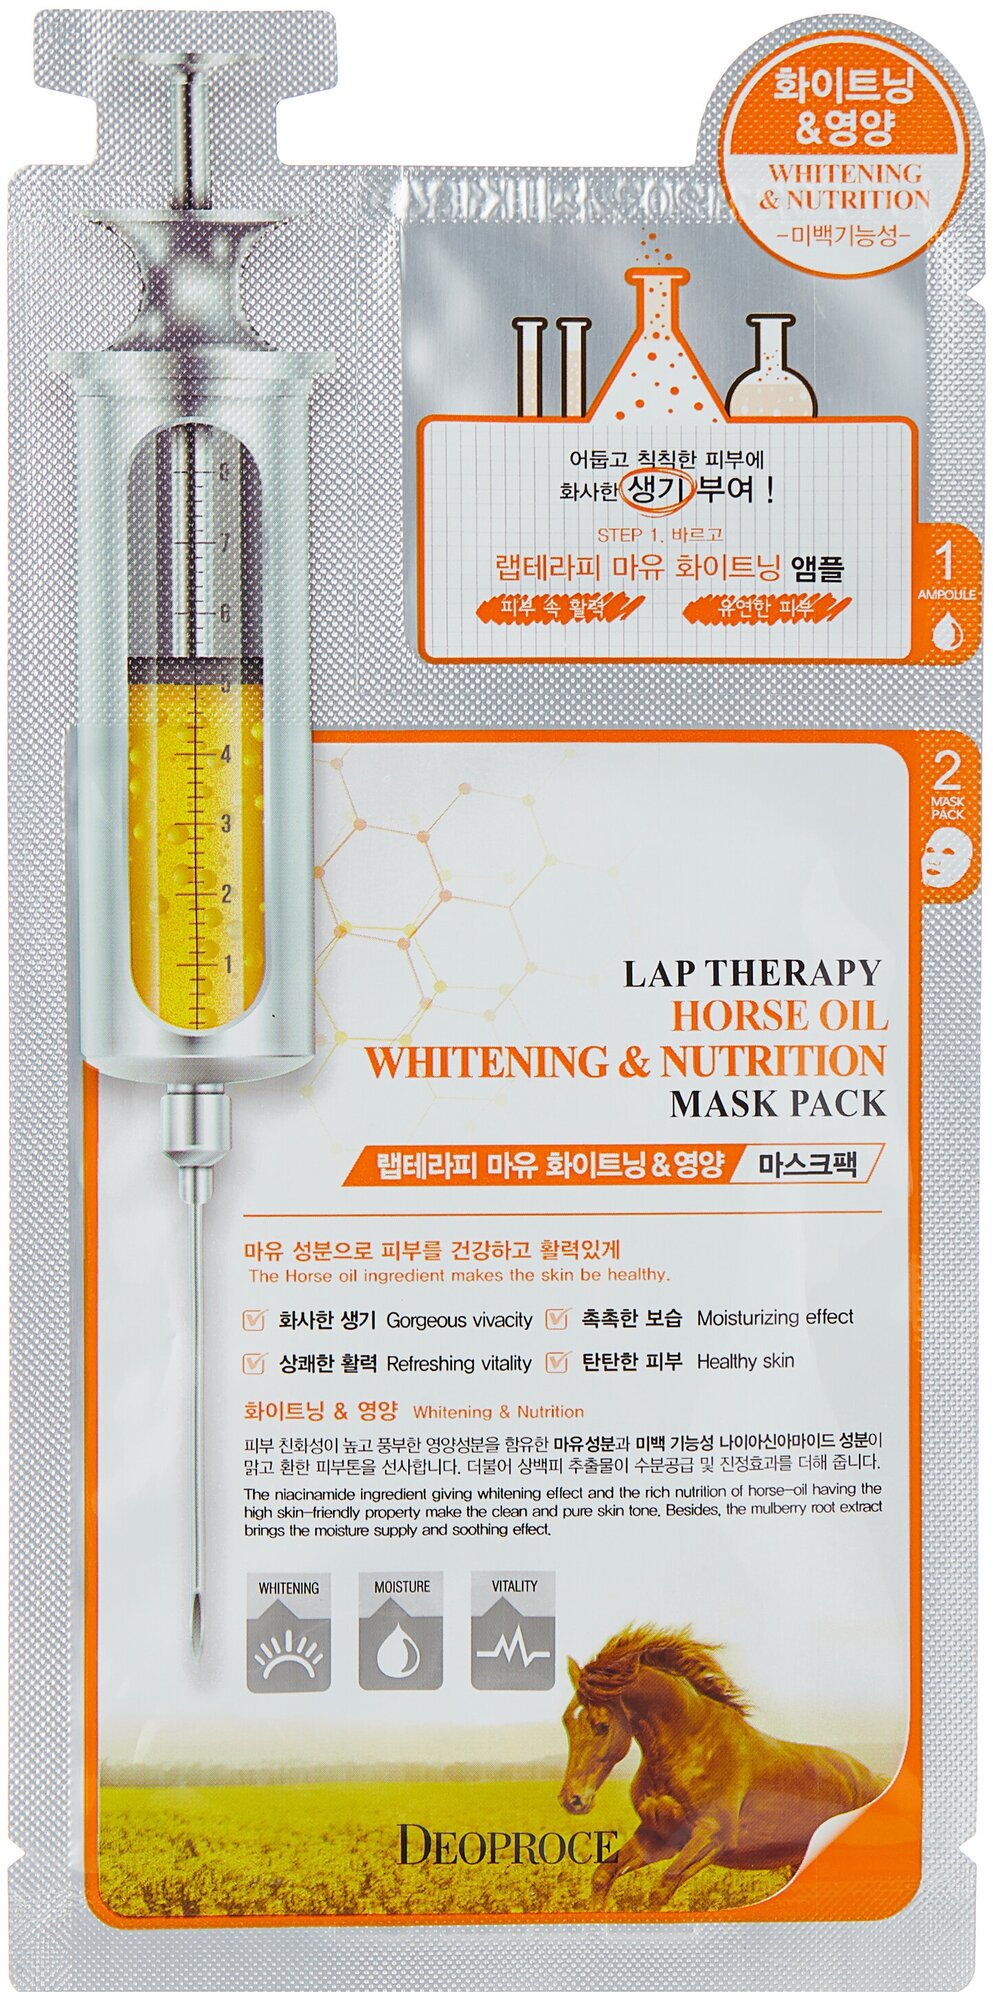 Deoproce Маска-сыворотка для лица питательная Lap Therapy Ampoule Mask Pack horse oil whitening & nutrition, 25 гр.